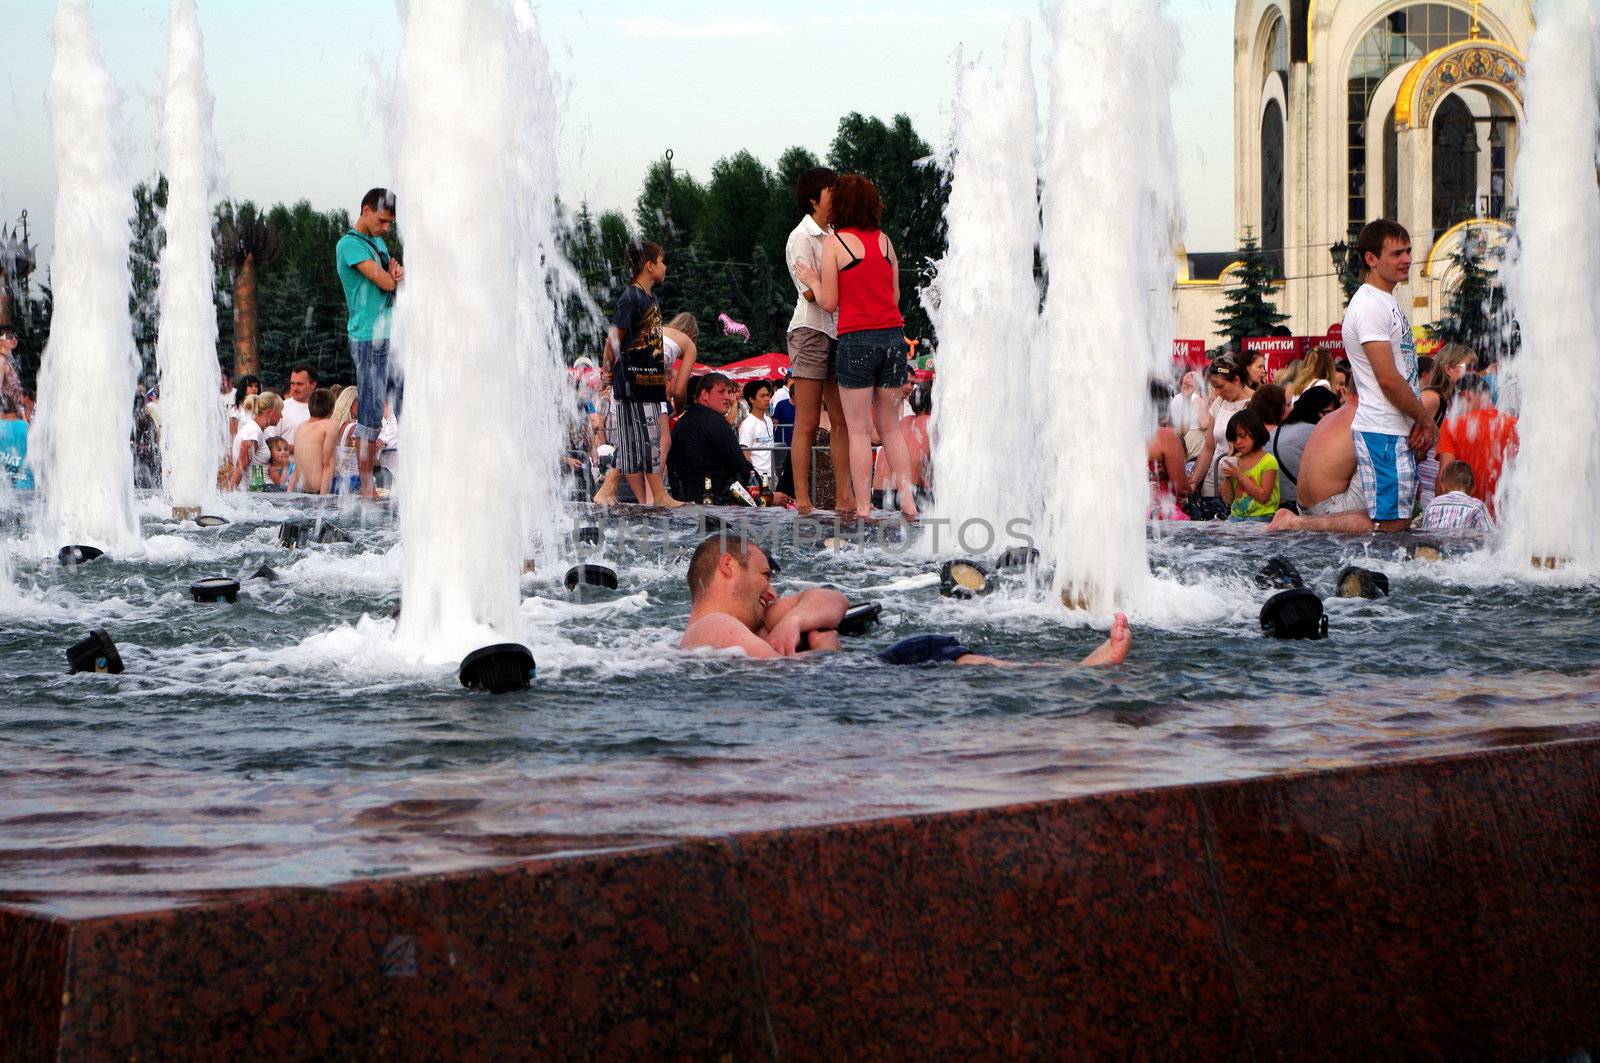 Moscow, Russia - June 26, 2010: Summer day. Peoples have fun in youth day celebration on June 26, 2010 at victory park in Moscow, Russia